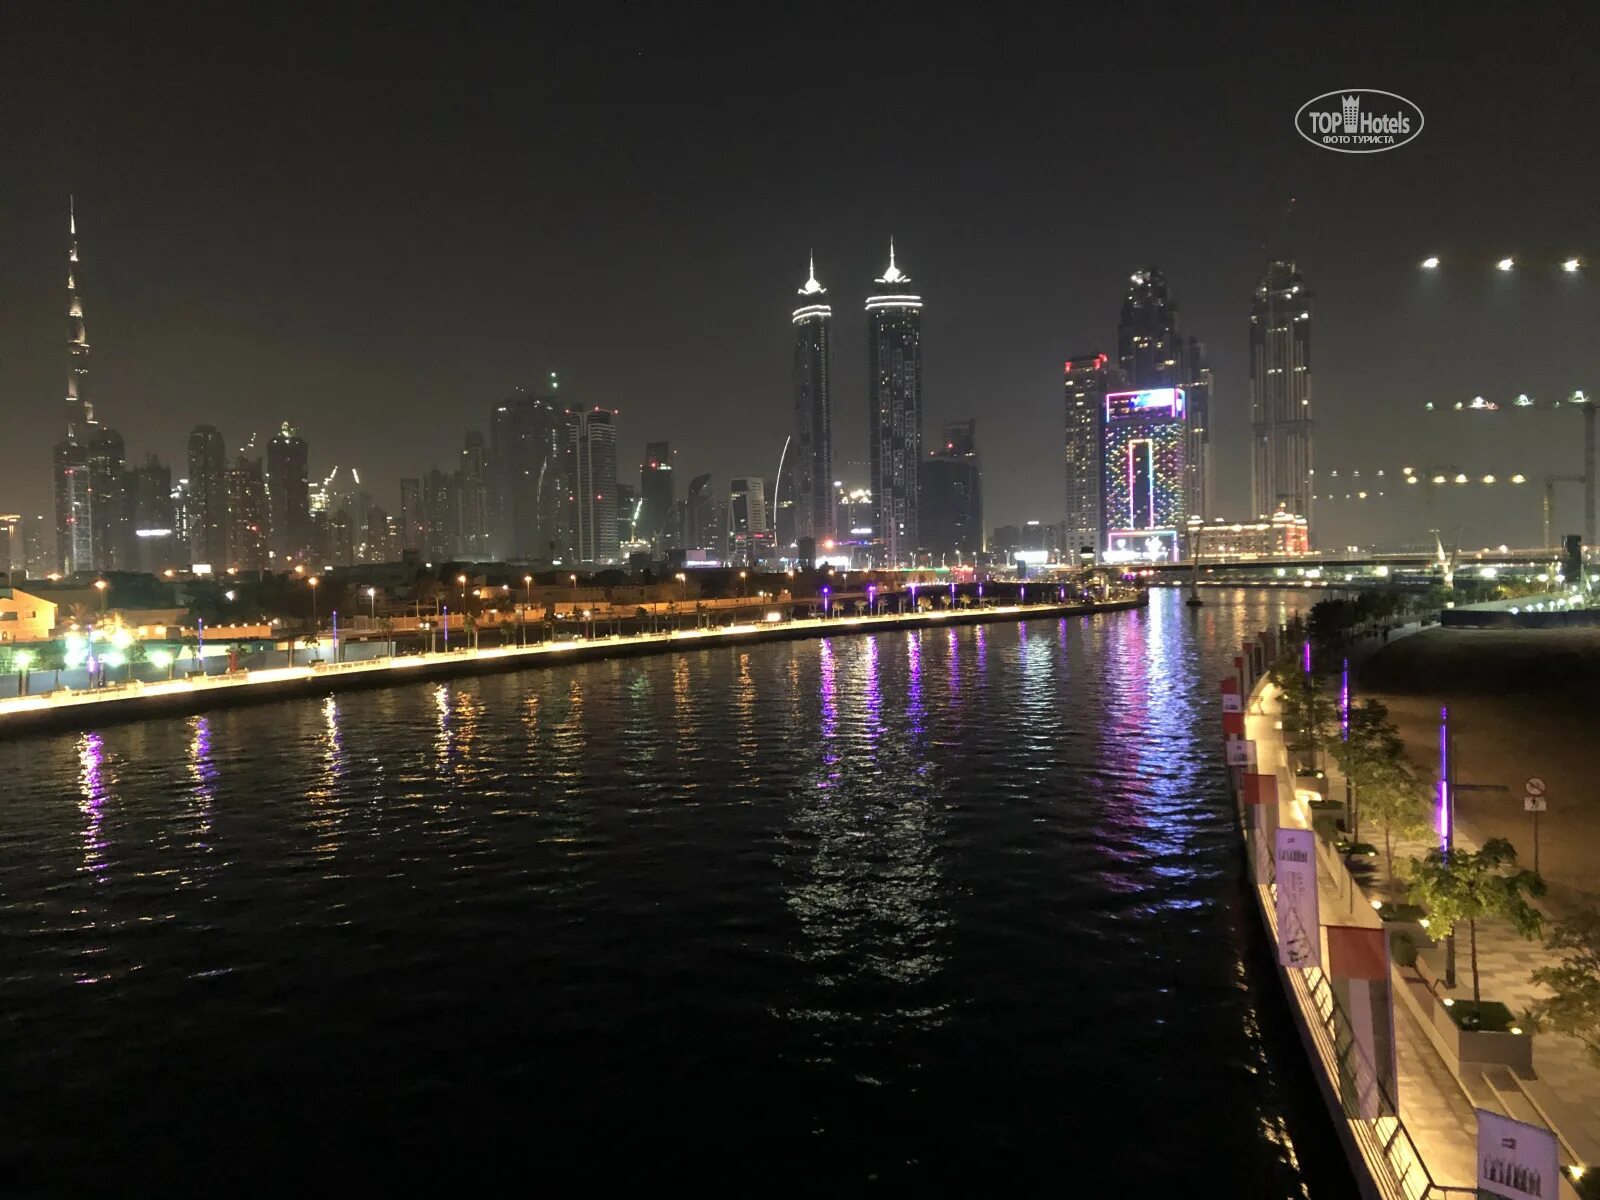 Central canal. Canal Central Hotel Дубай. Canal Central Hotel 5 Dubai. Canal Central Hotel Business Bay 5*. Canal Central Business Bay 5 фото.